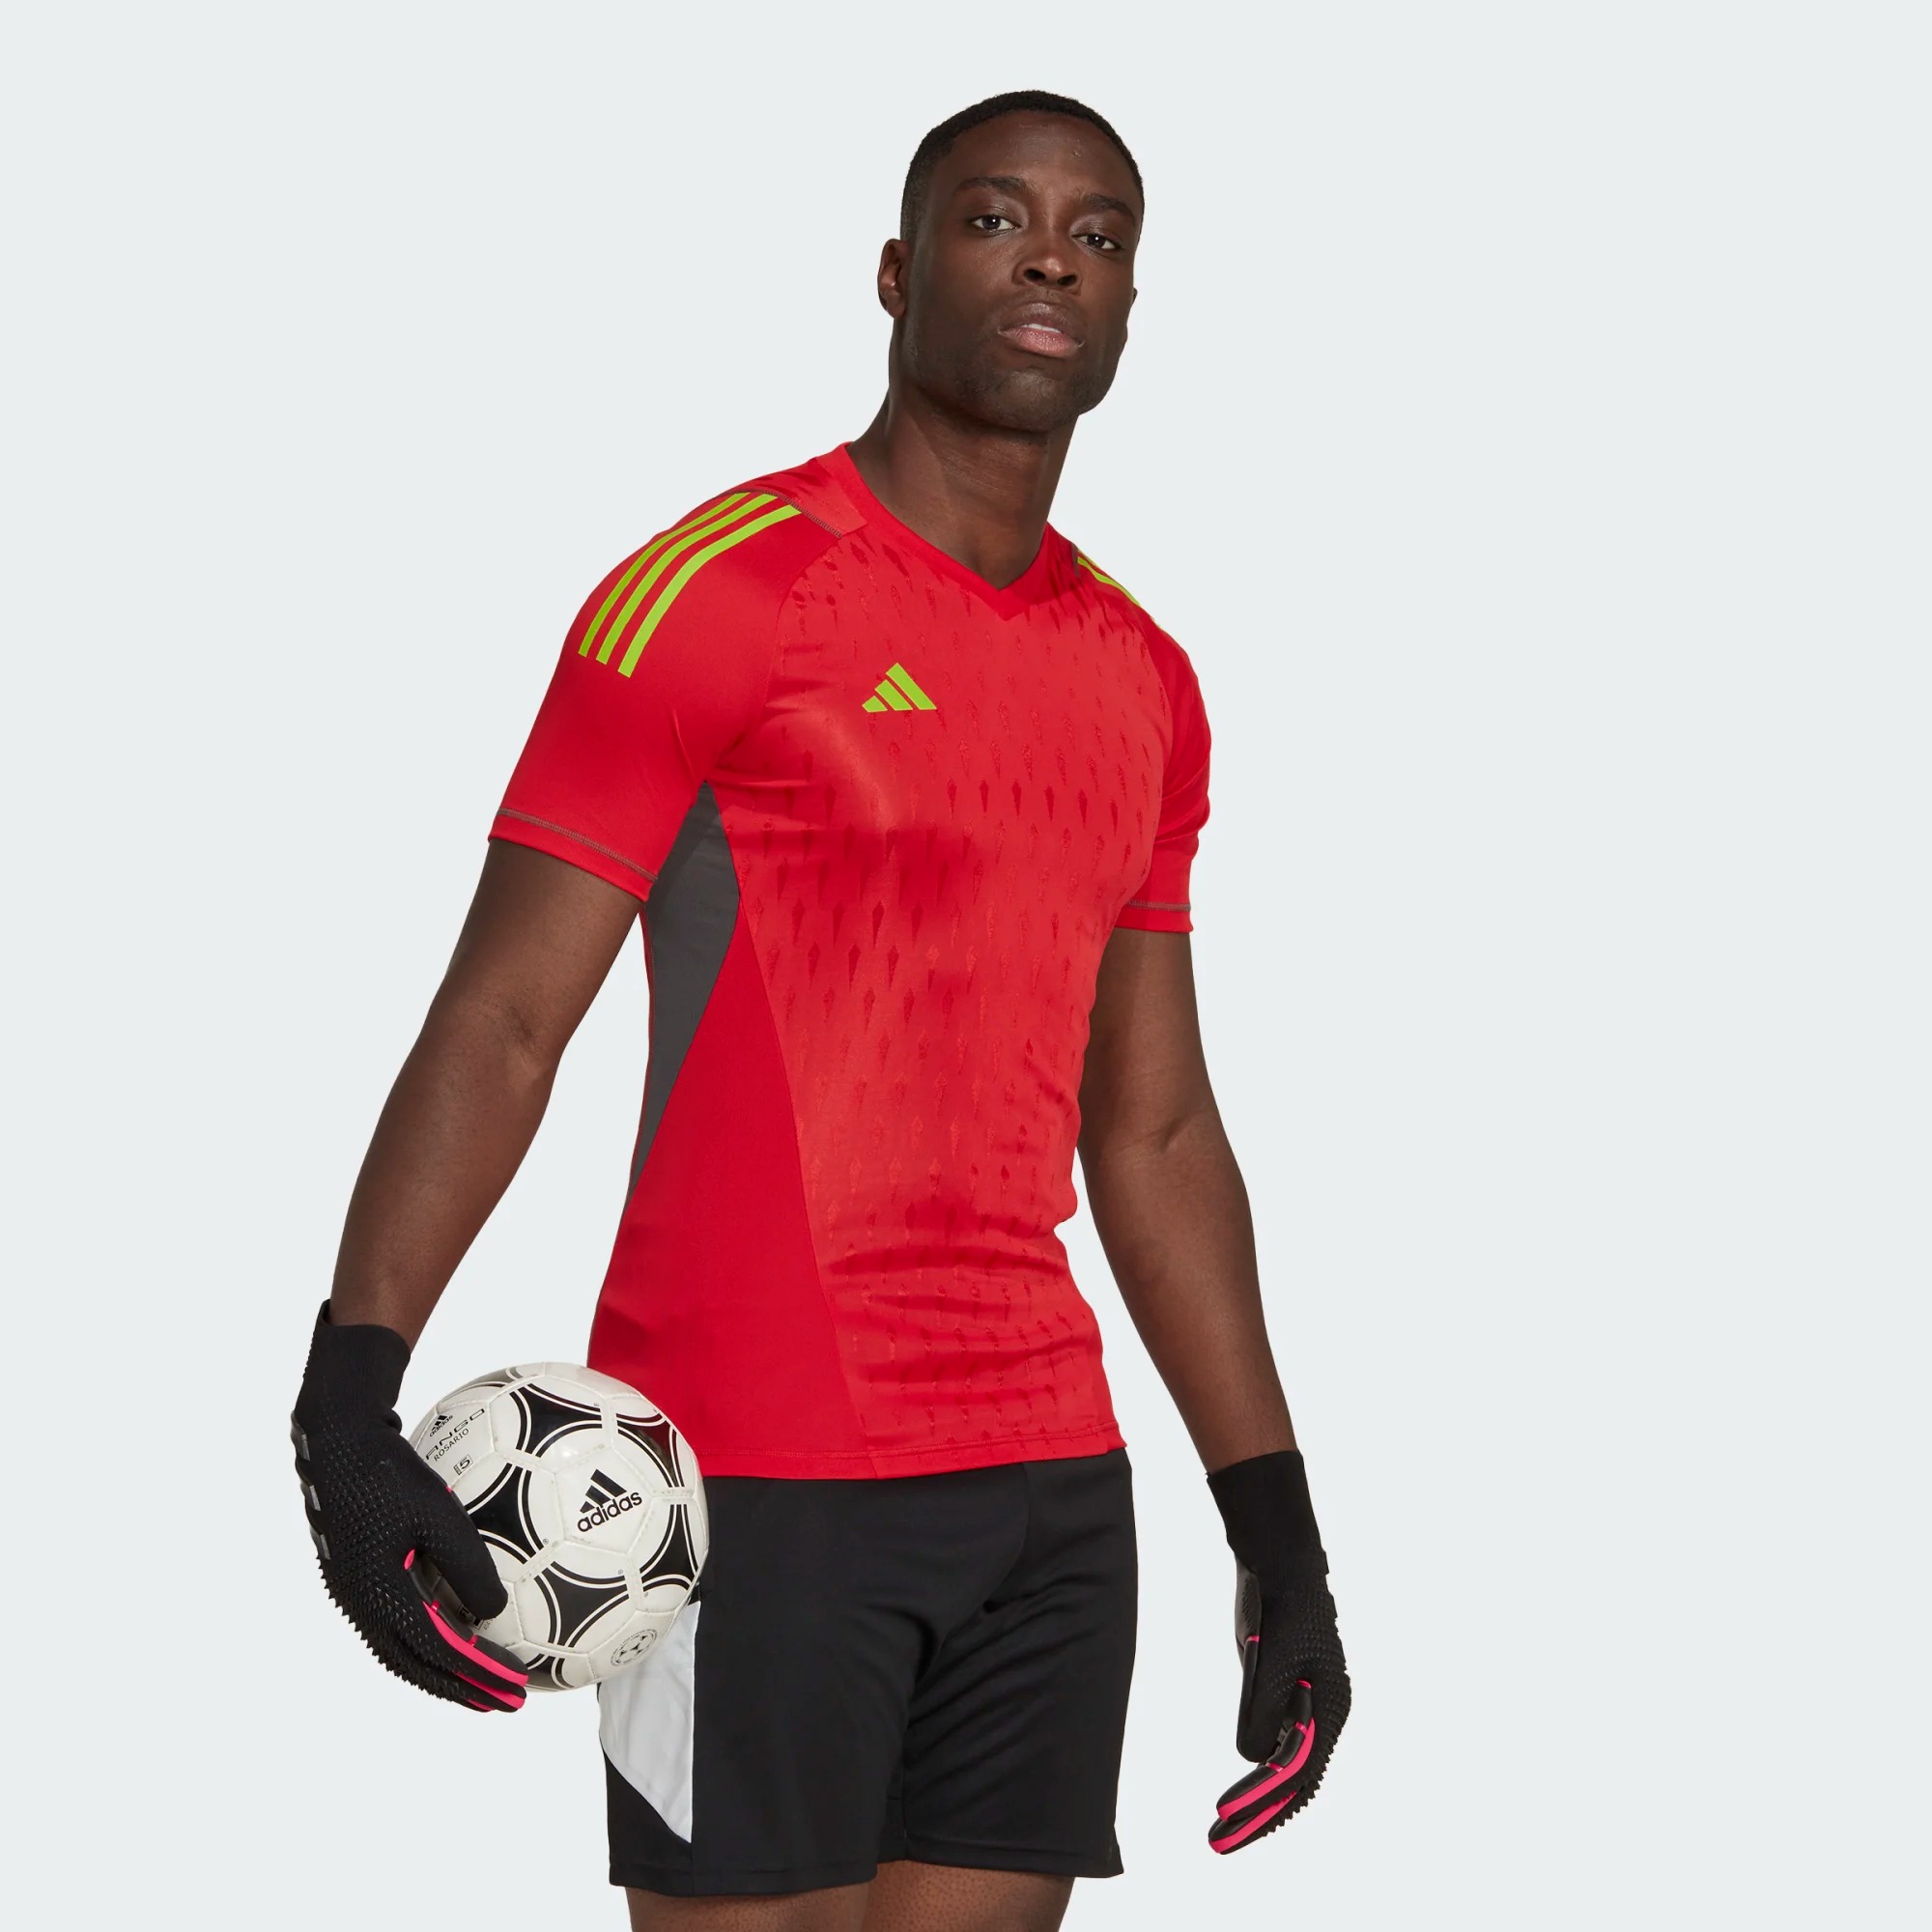 ADIDAS T23 PROMO GK JERSEY SHORT SLEEVE TEAM CORE RED